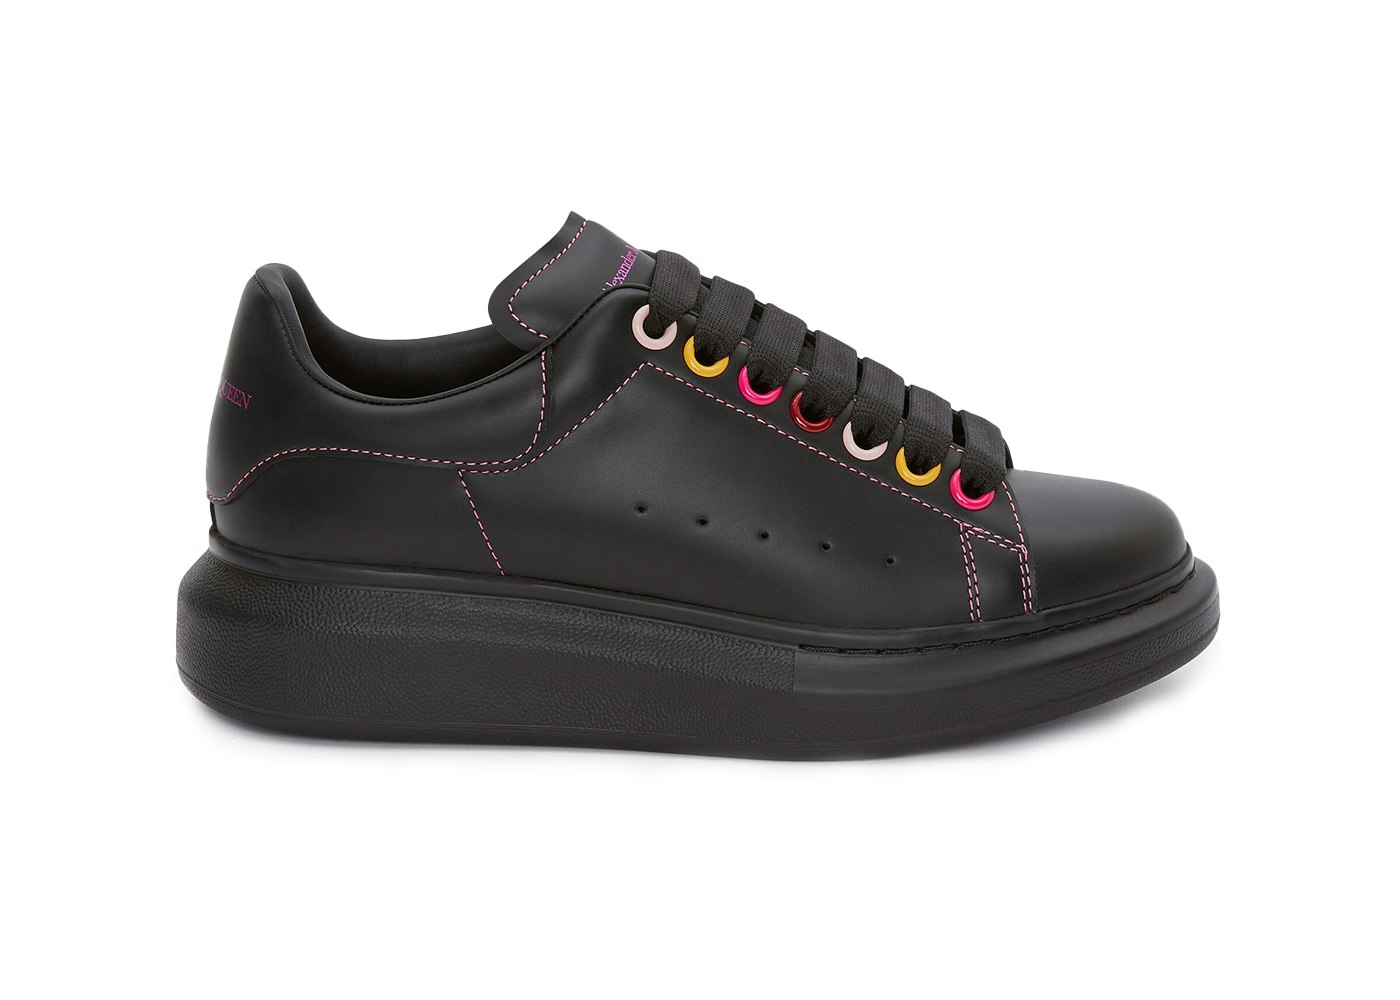 Alexander McQUEEN Oversized Sneaker White Smooth Calf Leather Multicolor  Eyelets Rainbow Laces - Chanz Sneakers